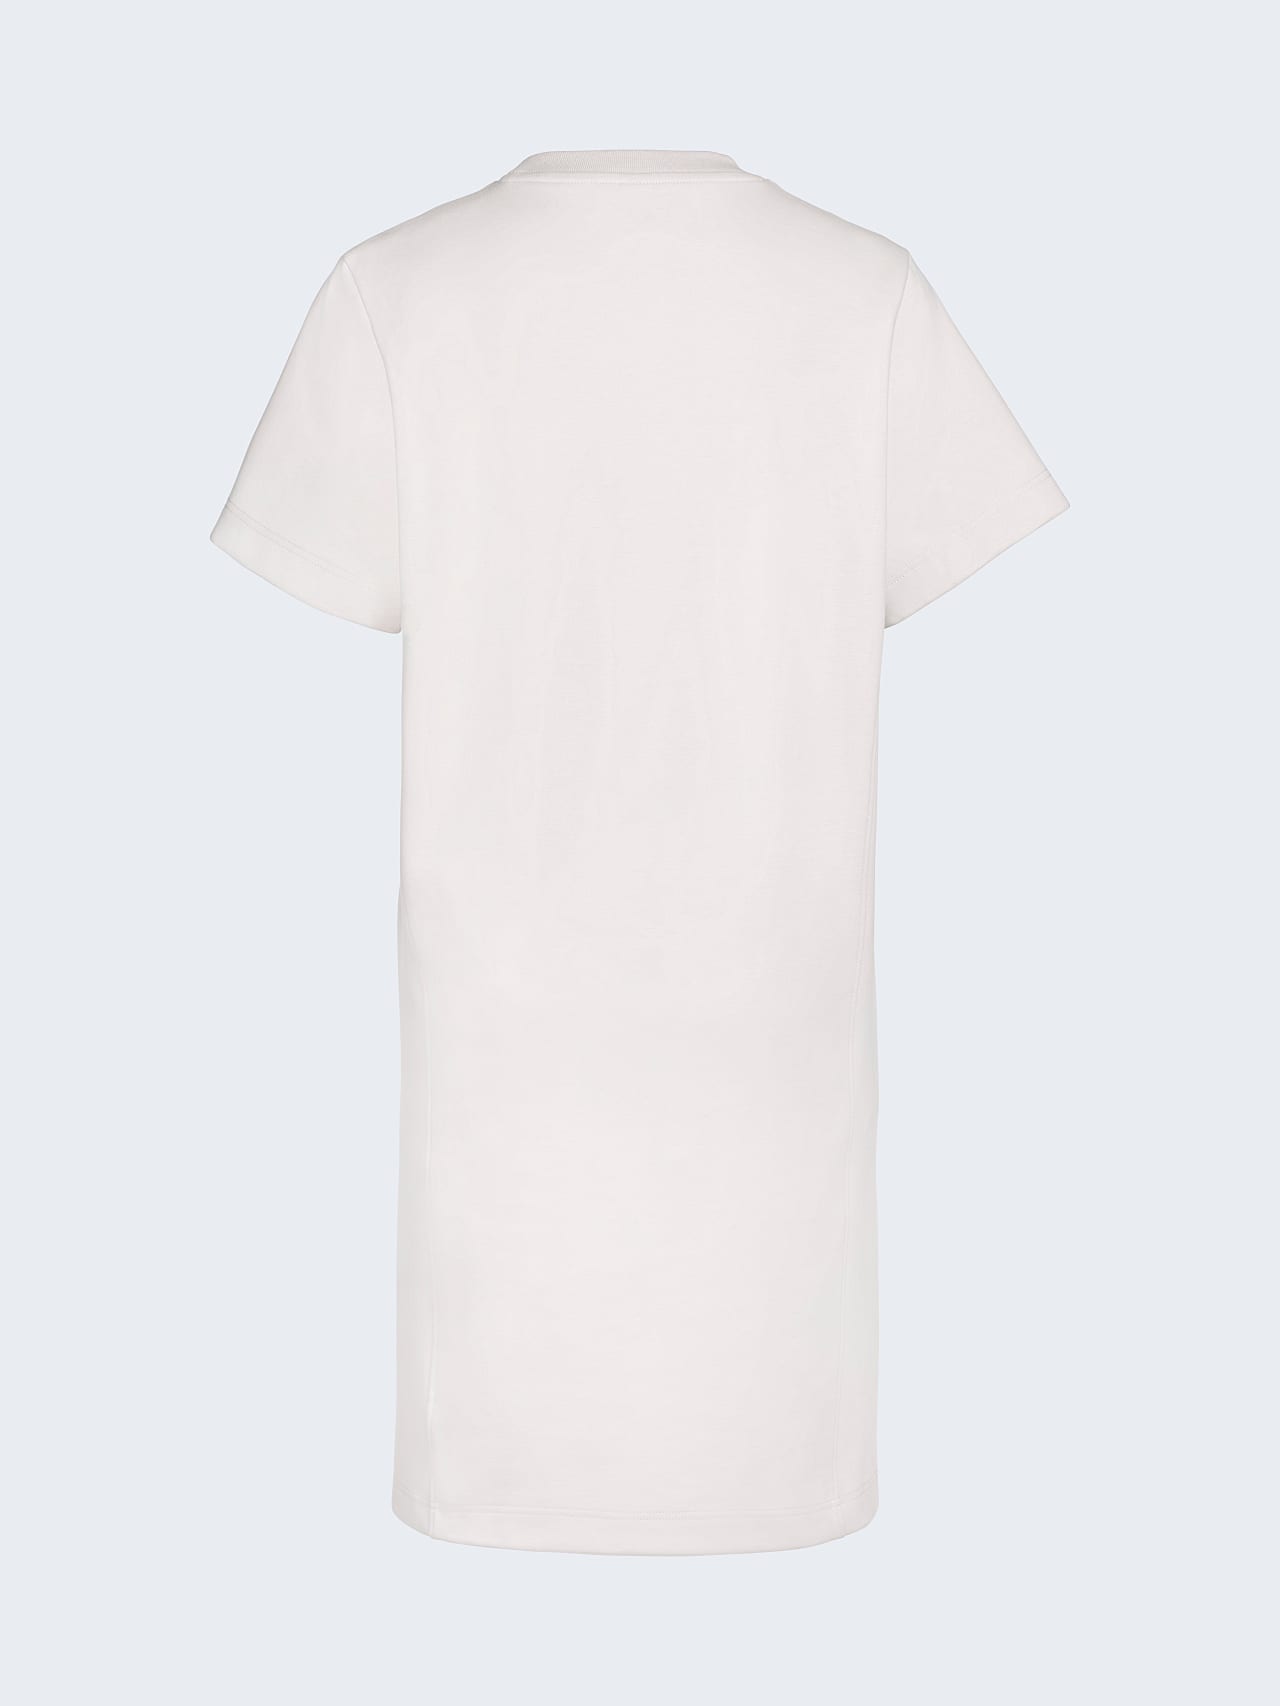 AlphaTauri | STAKU V1.Y6.01 | Sweat Dress with Logo Embroidery in offwhite for Women